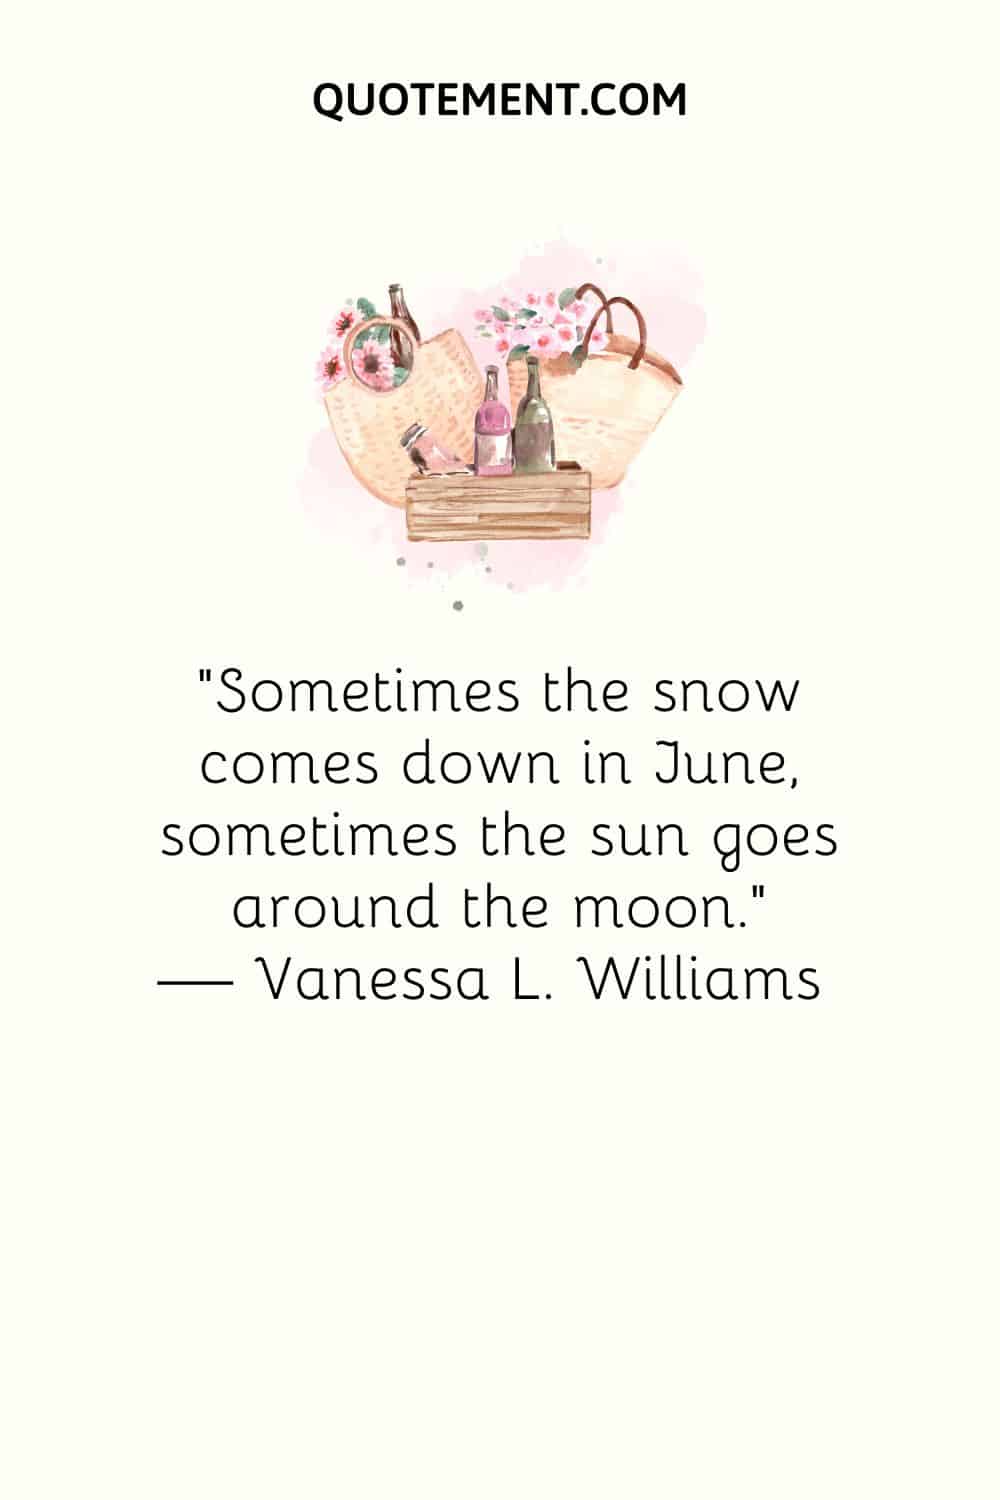 “Sometimes the snow comes down in June, sometimes the sun goes around the moon.” ― Vanessa L. Williams